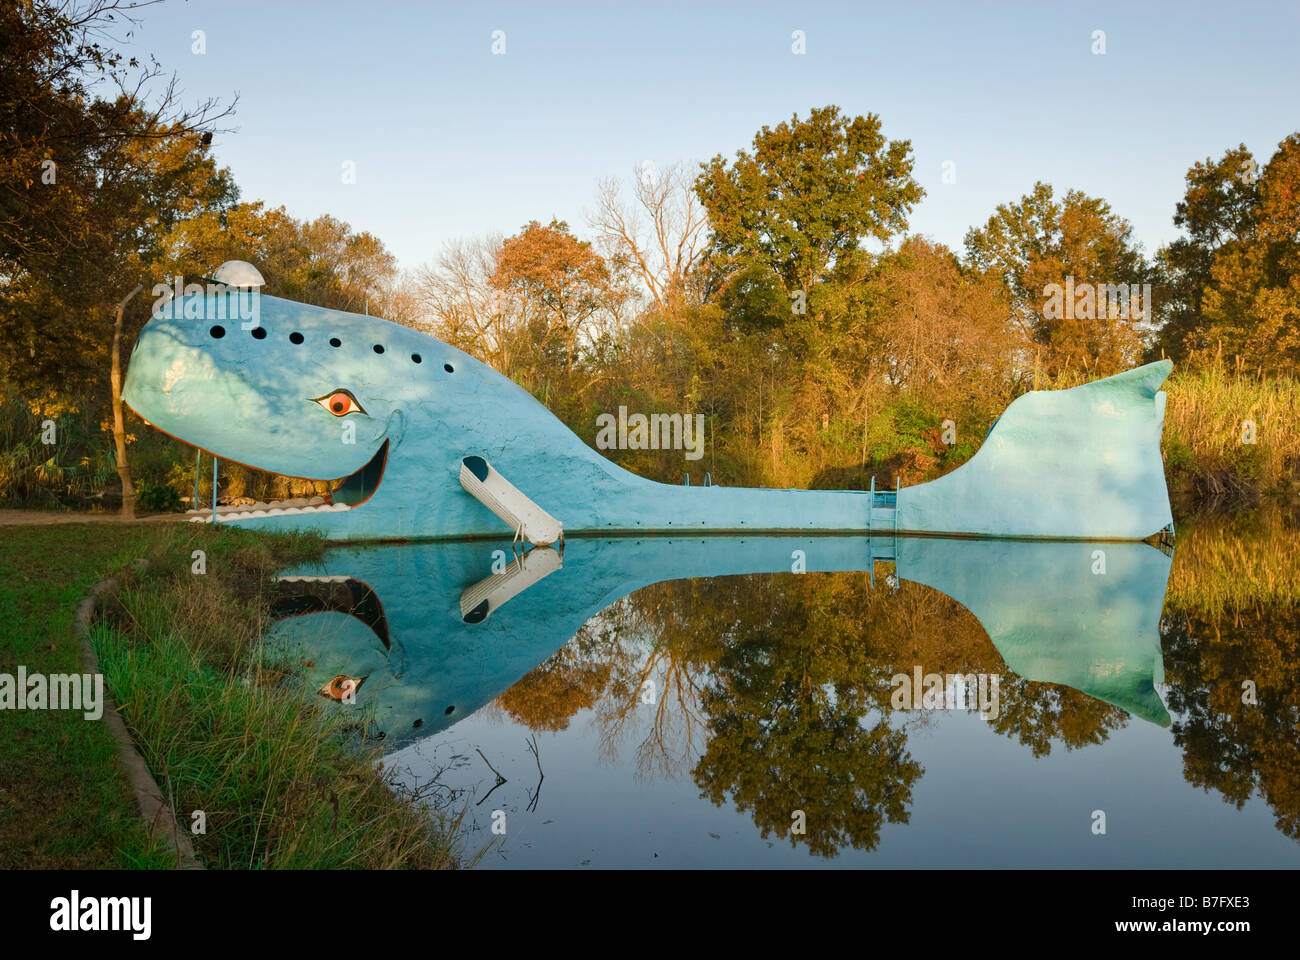 The Blue Whale roadside attraction on Route 66 in Oklahoma, USA. Stock Photo